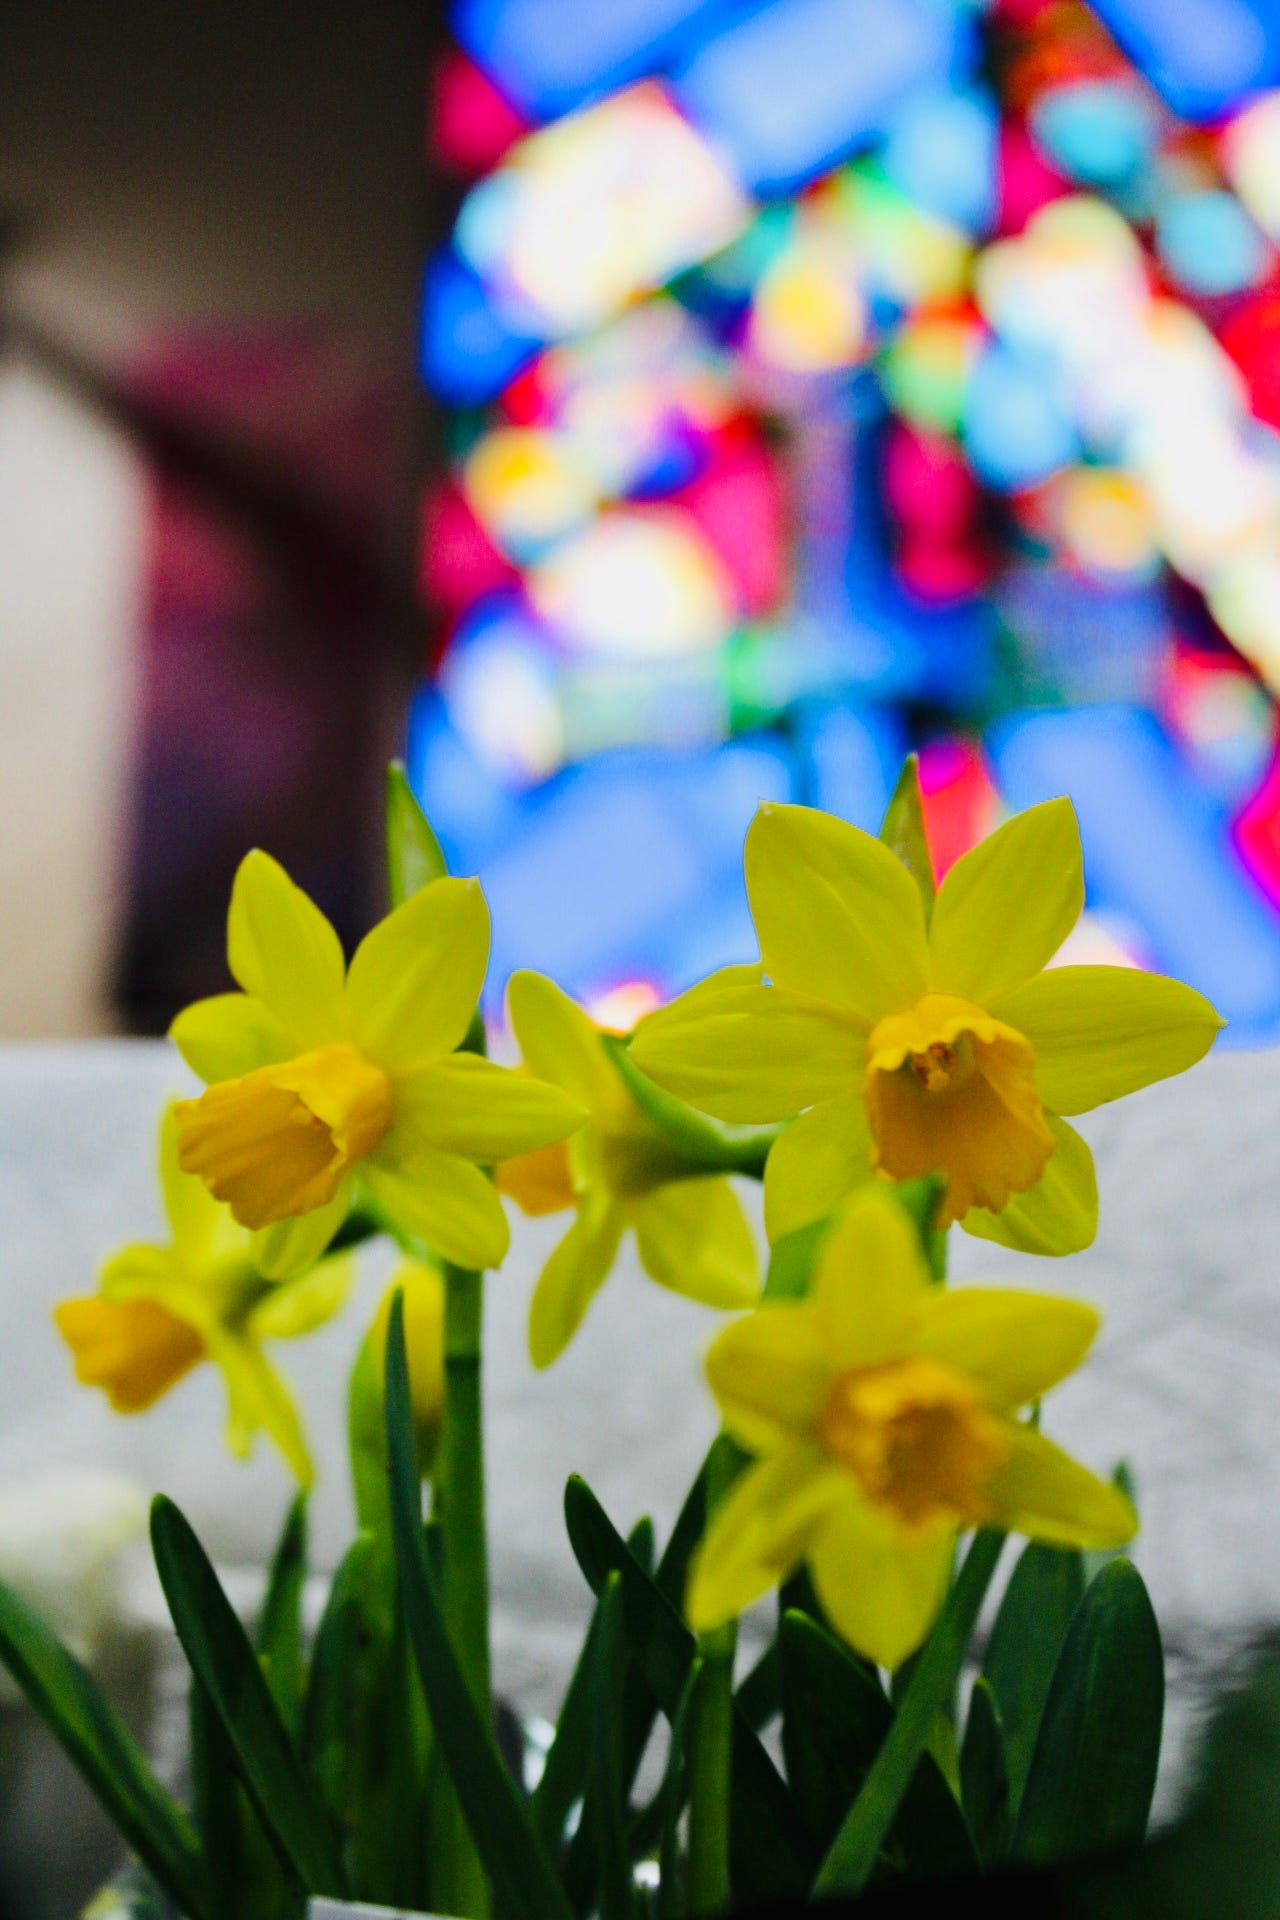 Tiny daffodils in front of blurred stained glass